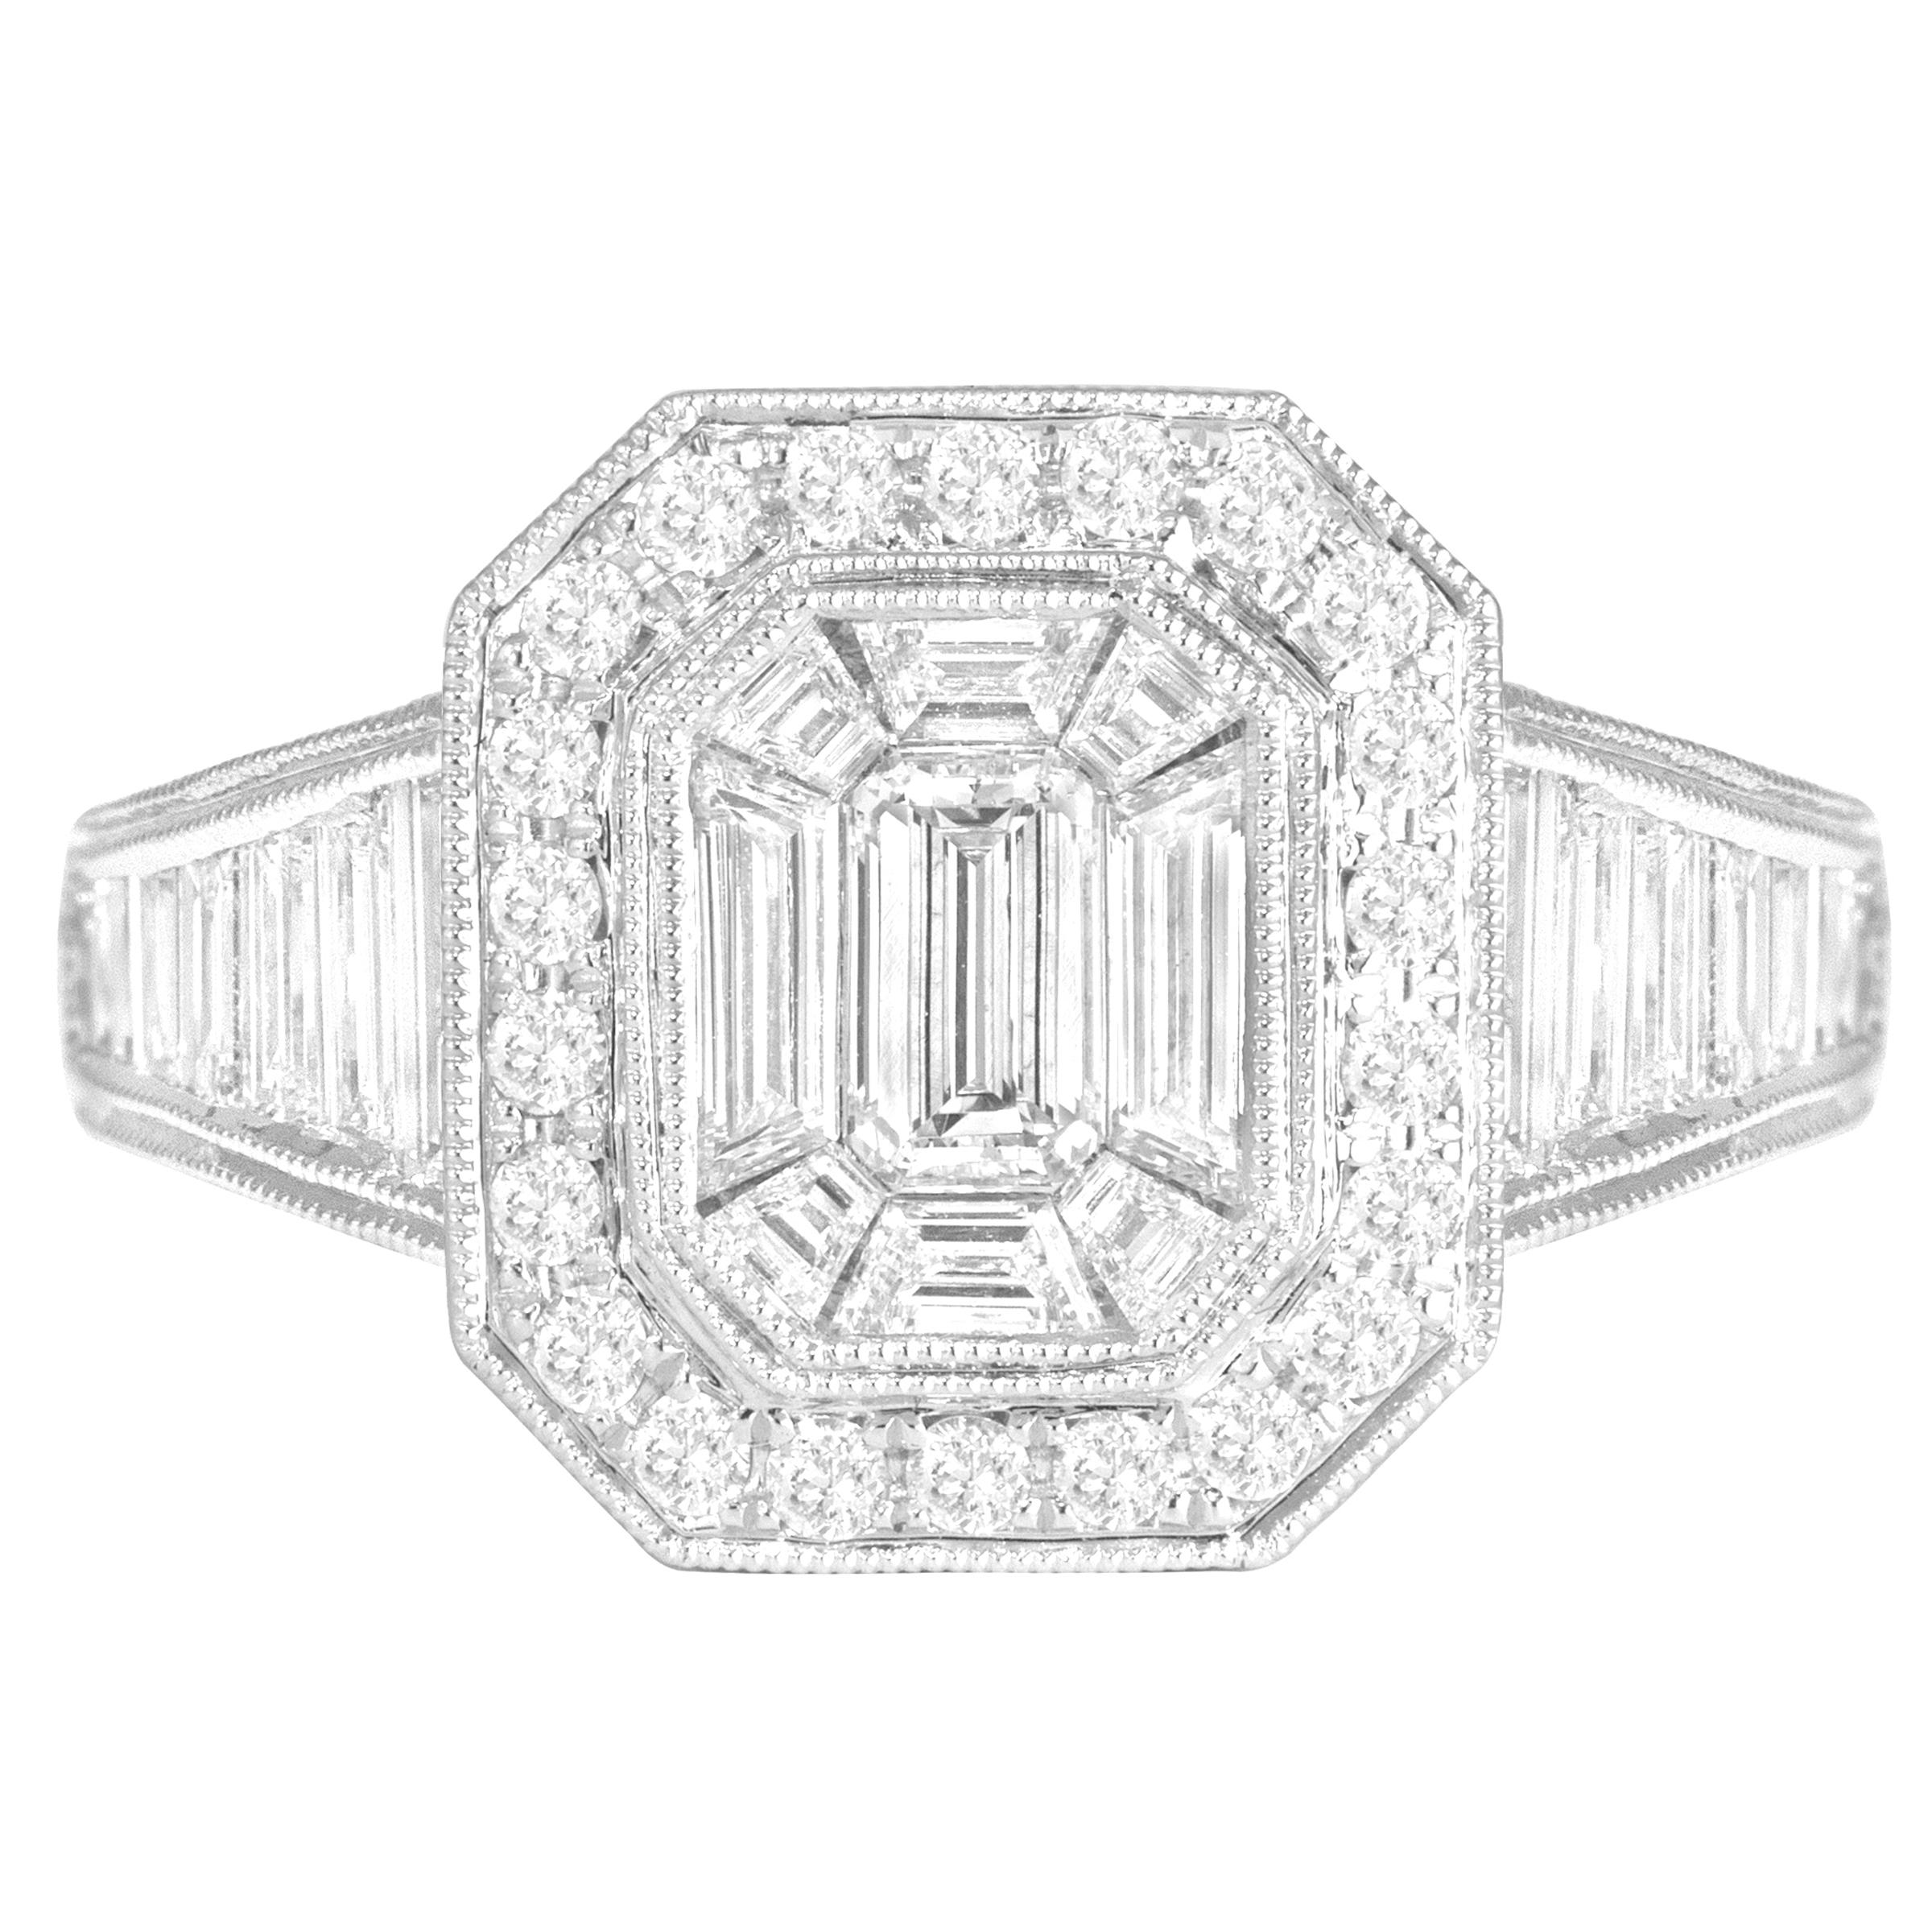 DiamondTown 2.31 Carat Baguette and Round Cluster Diamond Ring in 18k White Gold